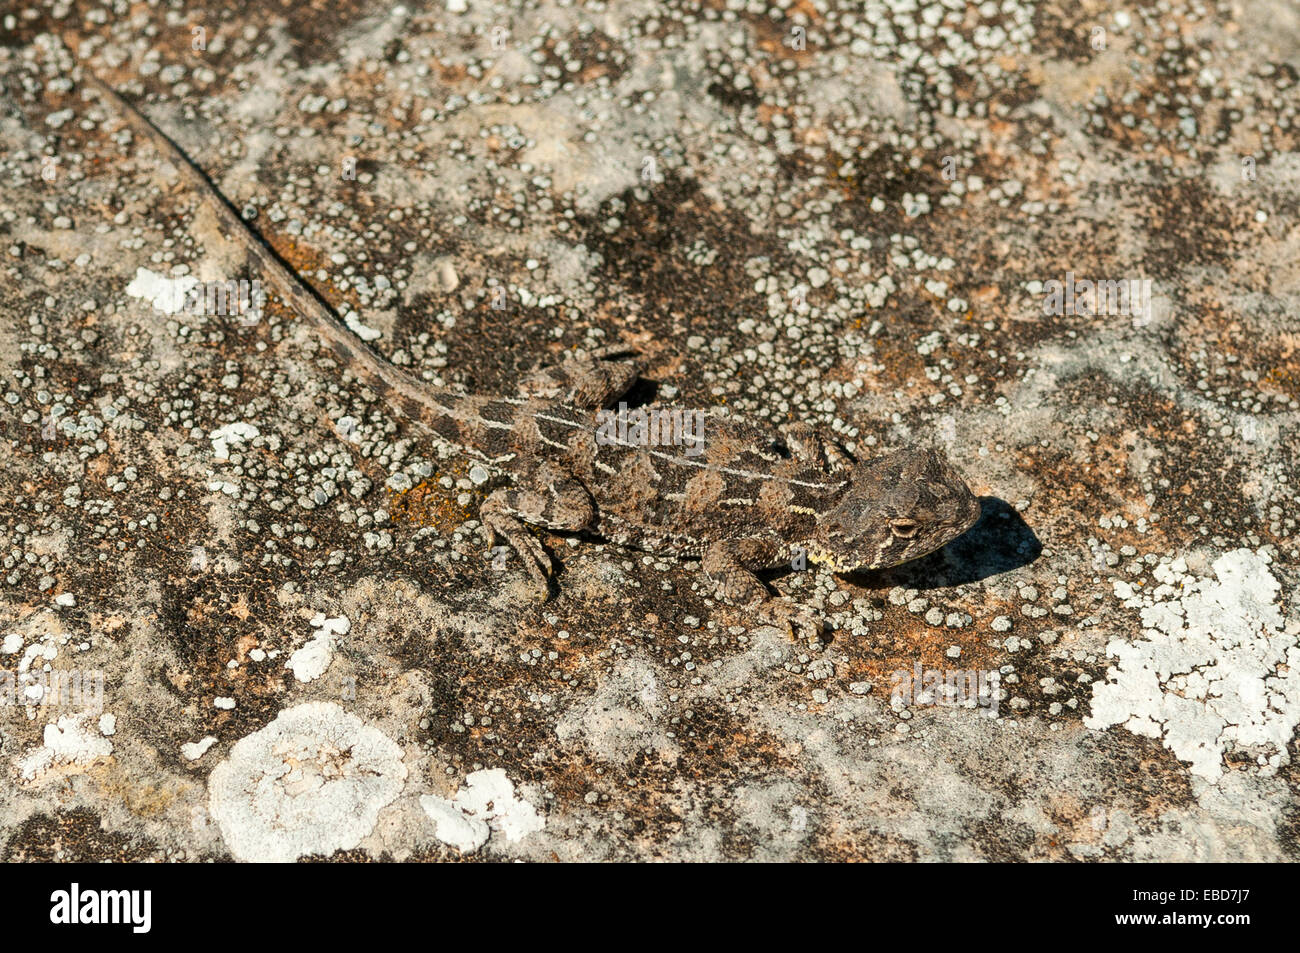 Lined Earless Dragon, Tympanocryptis lineata at Wanna Lookout, Lincoln NP, SA, Australia Stock Photo